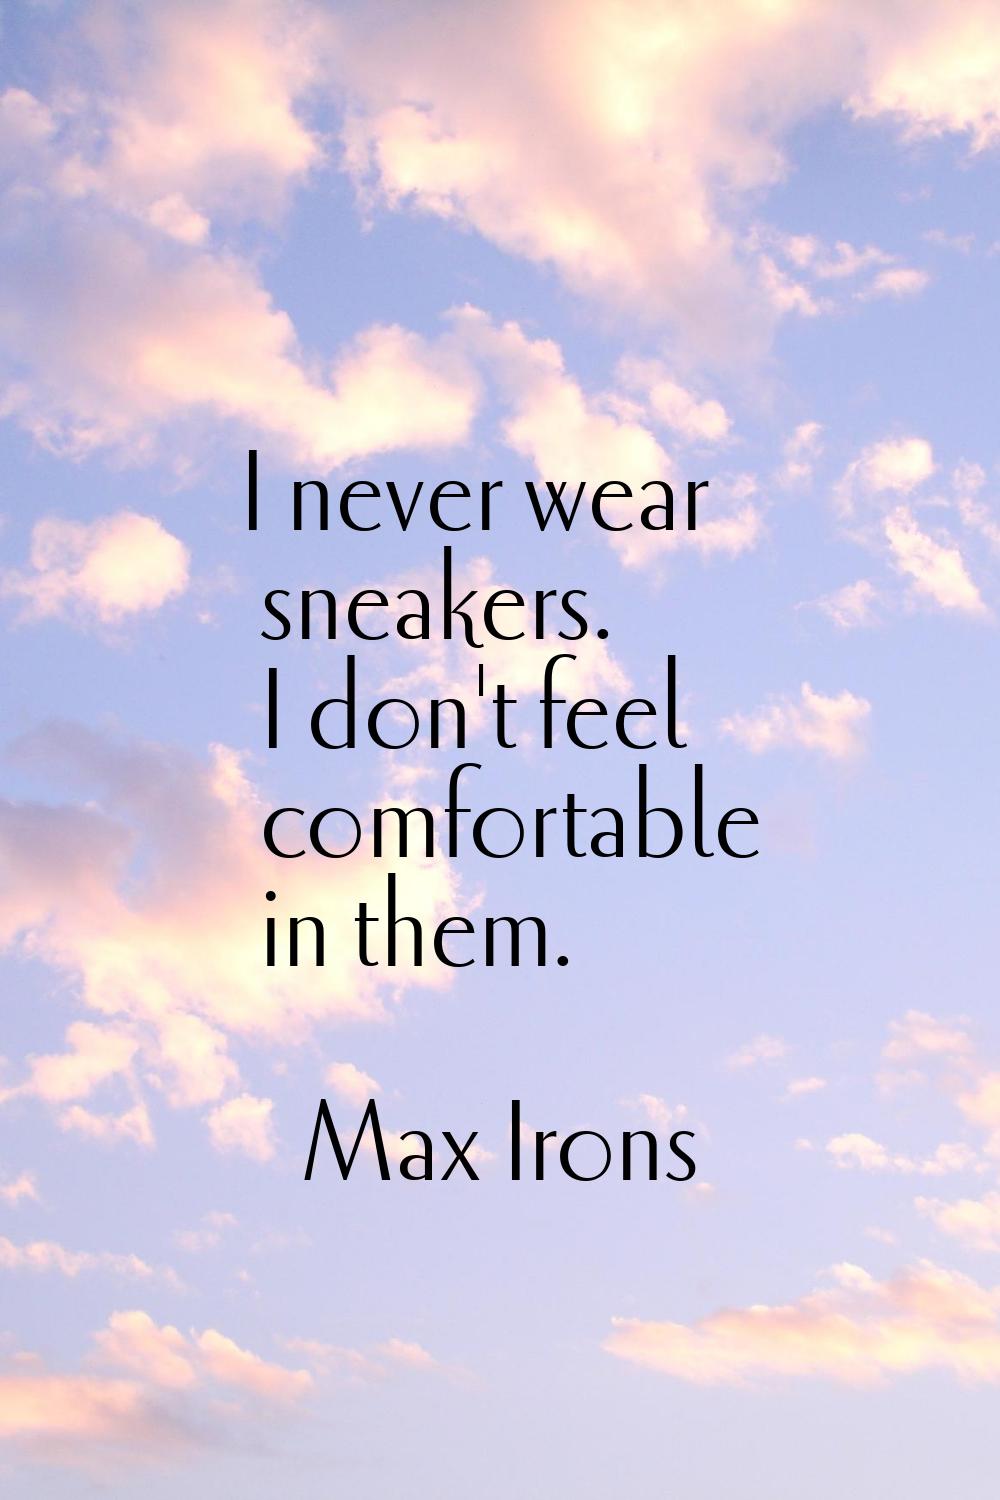 I never wear sneakers. I don't feel comfortable in them.